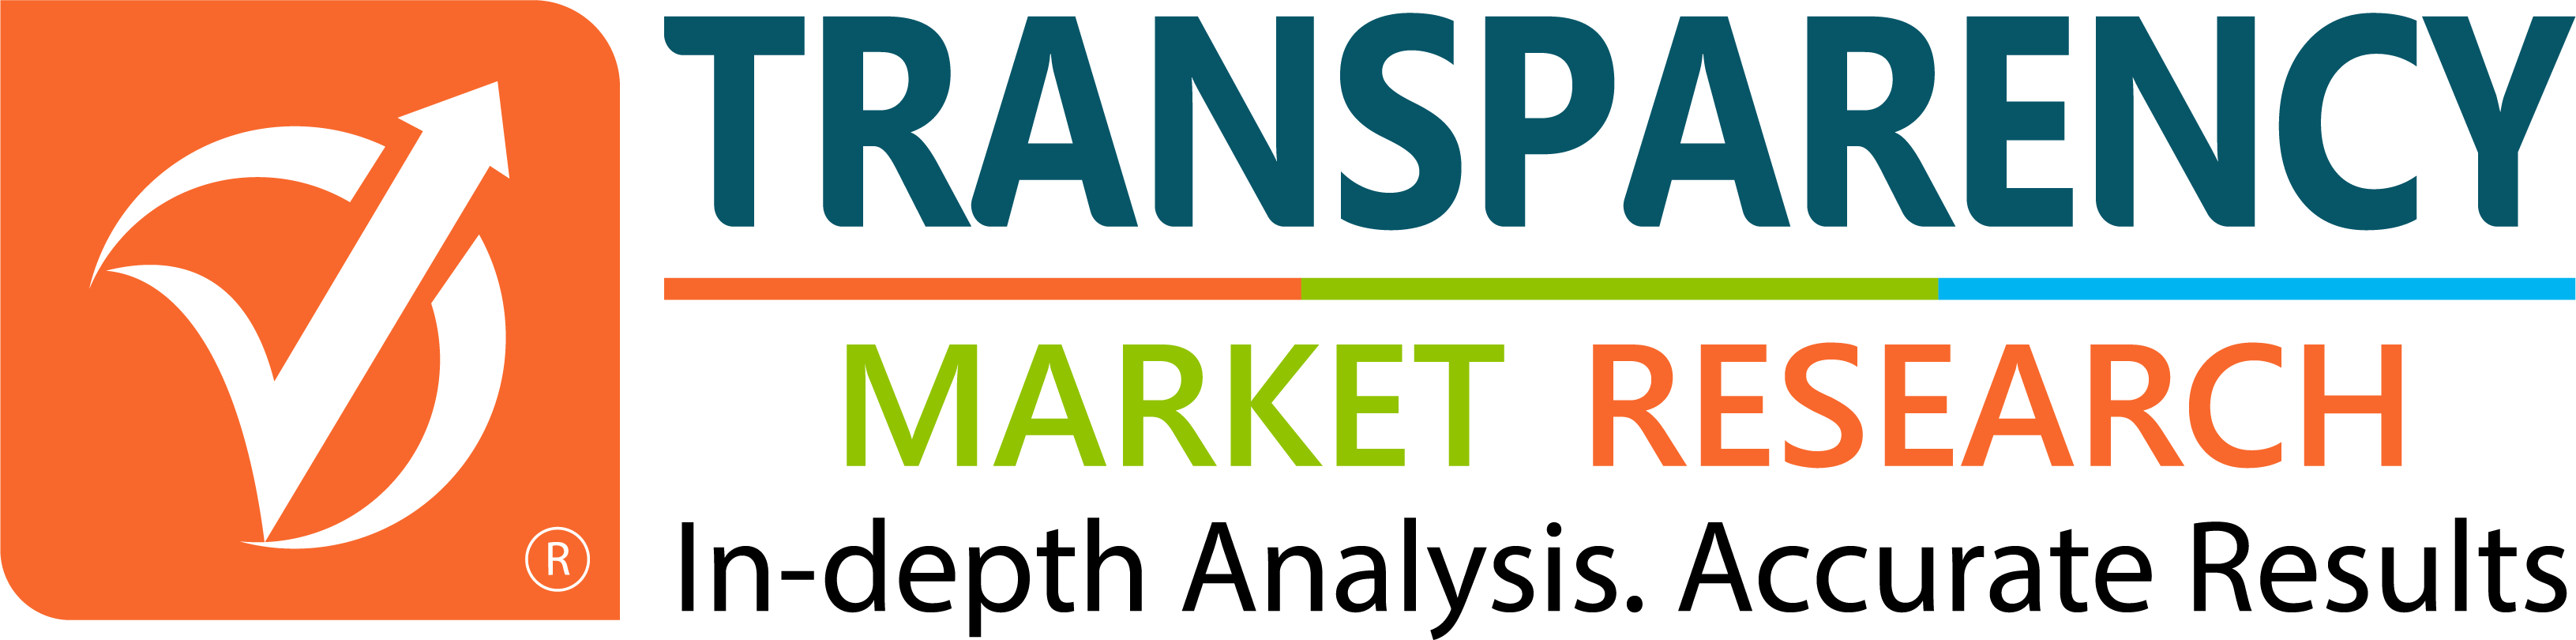 Respiratory Devices Market is Anticipated to Growth at a Moderate CAGR of 6.5% Between 2018 and 2026: Transparency Market Research